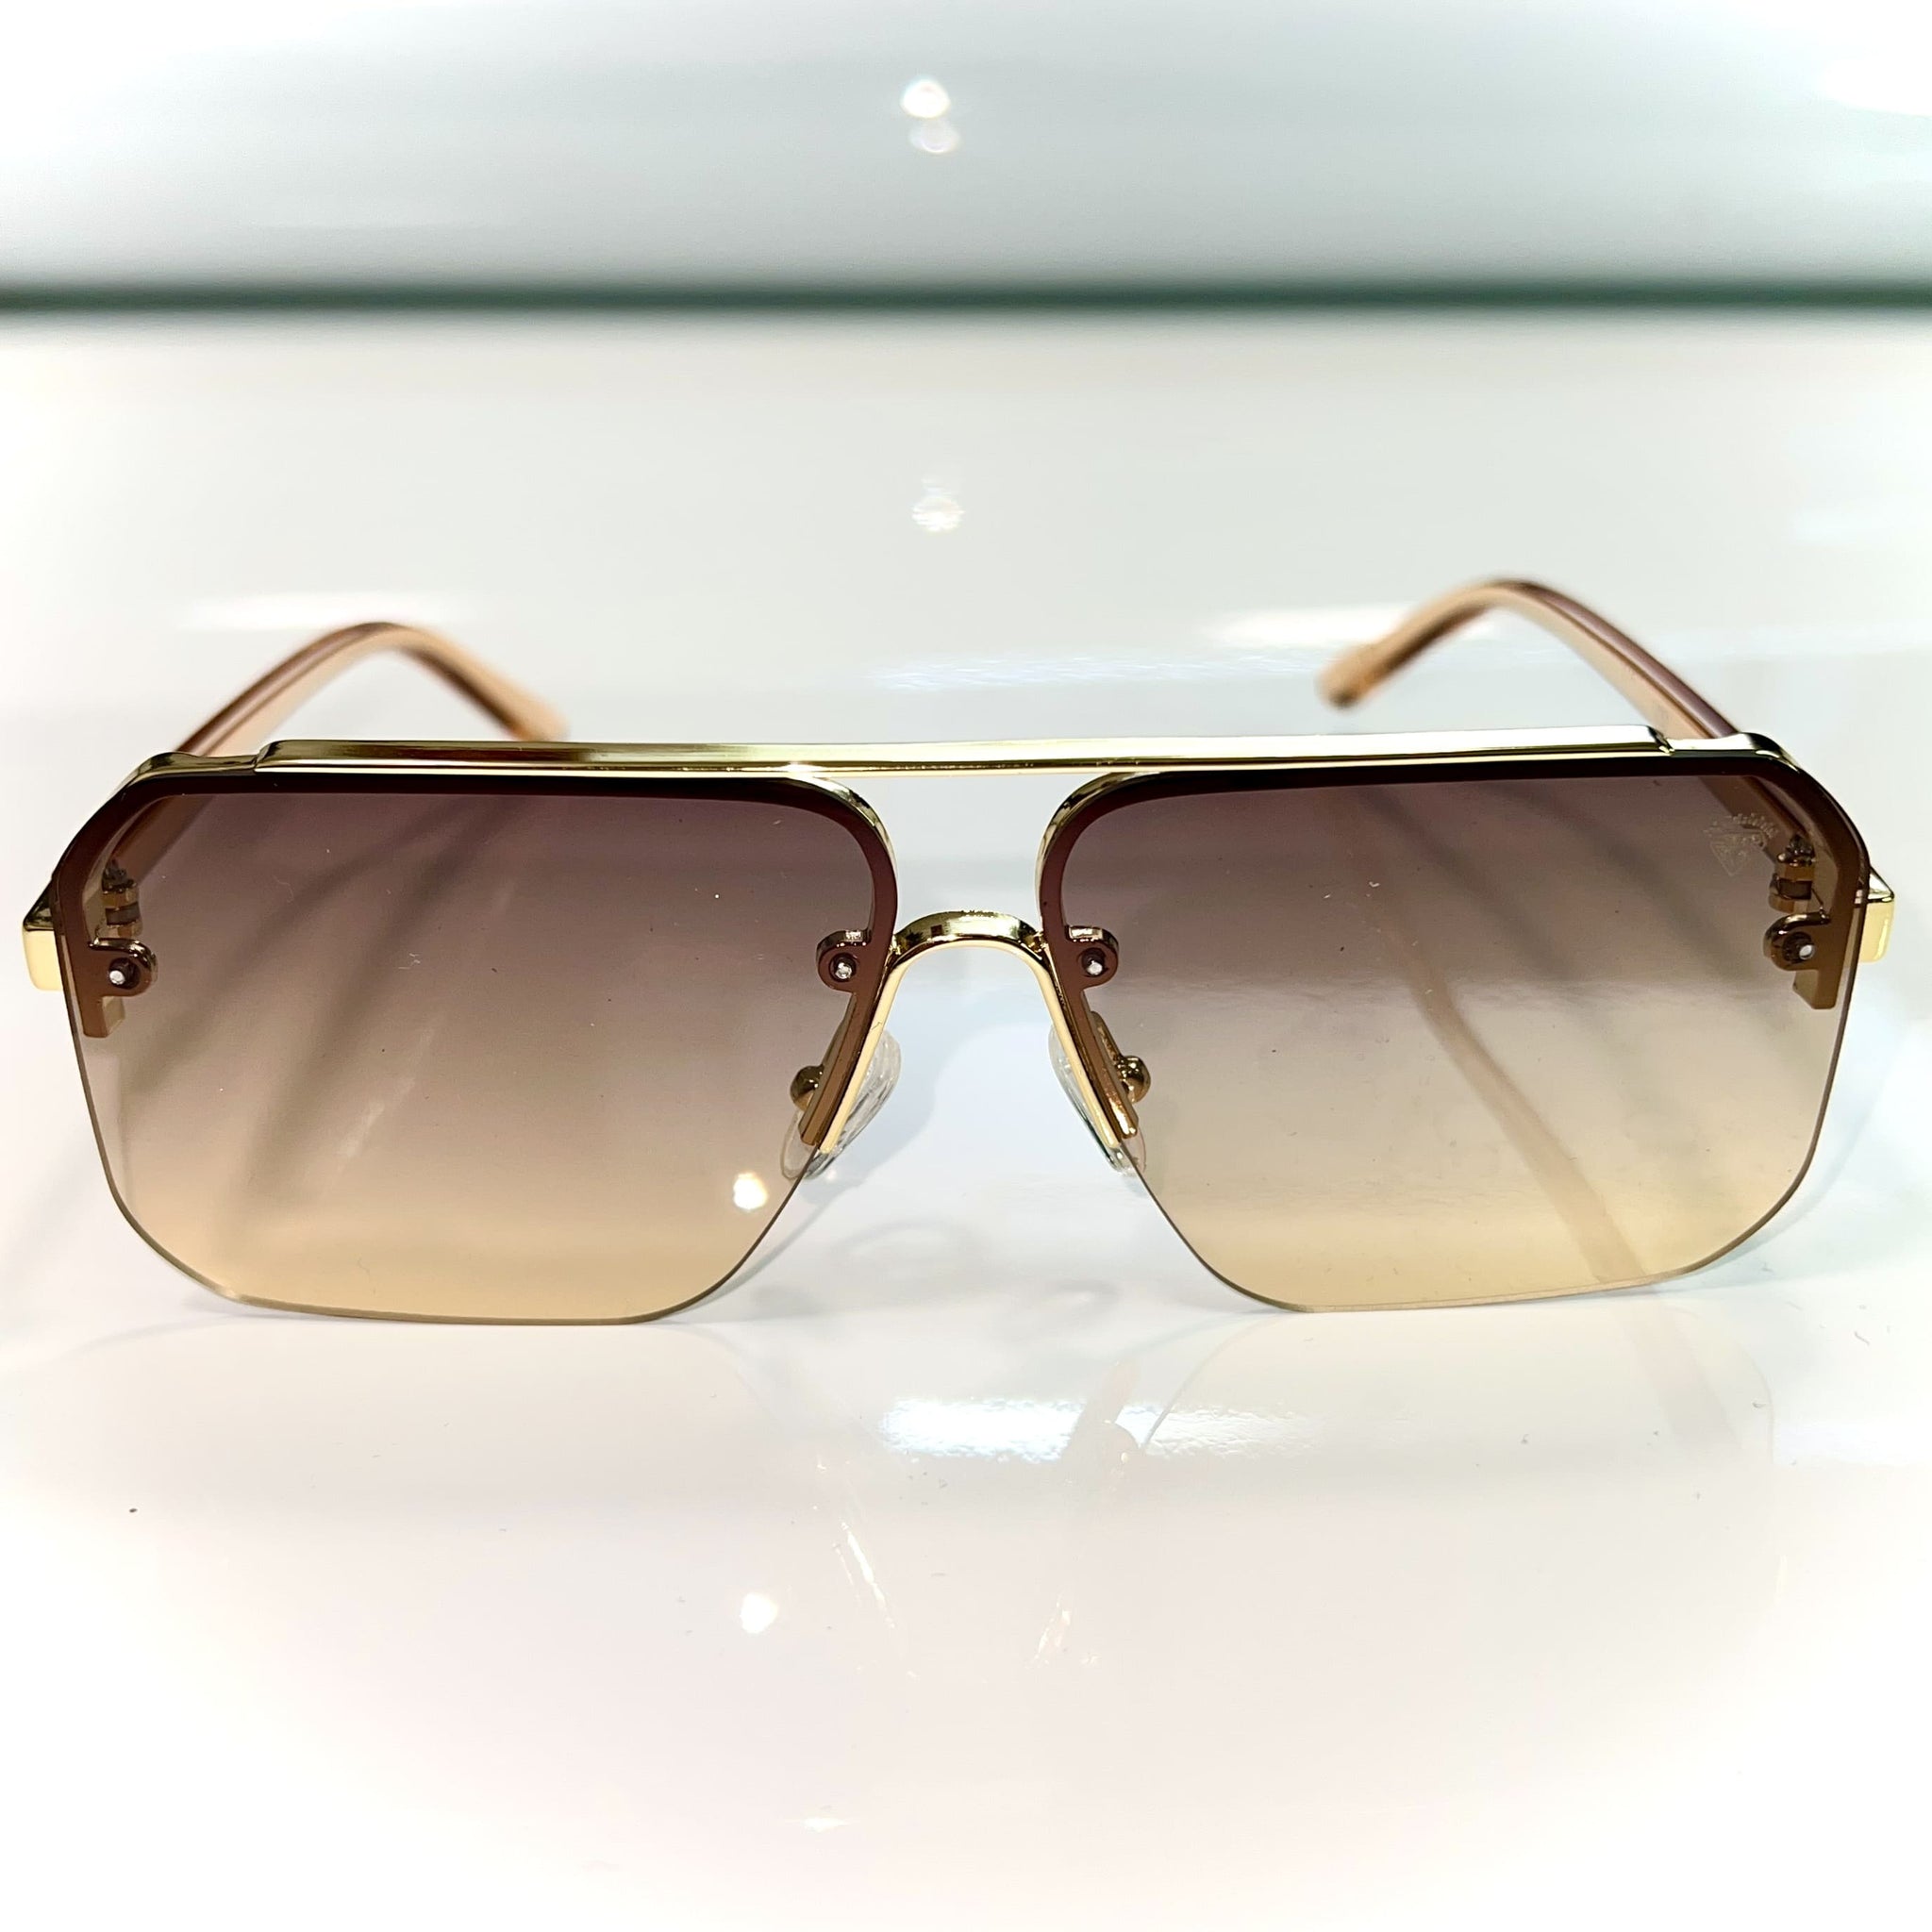 Macho Glasses - 14 carat gold plated / Silicon Side - Brown Shade - Sehgal Glasses